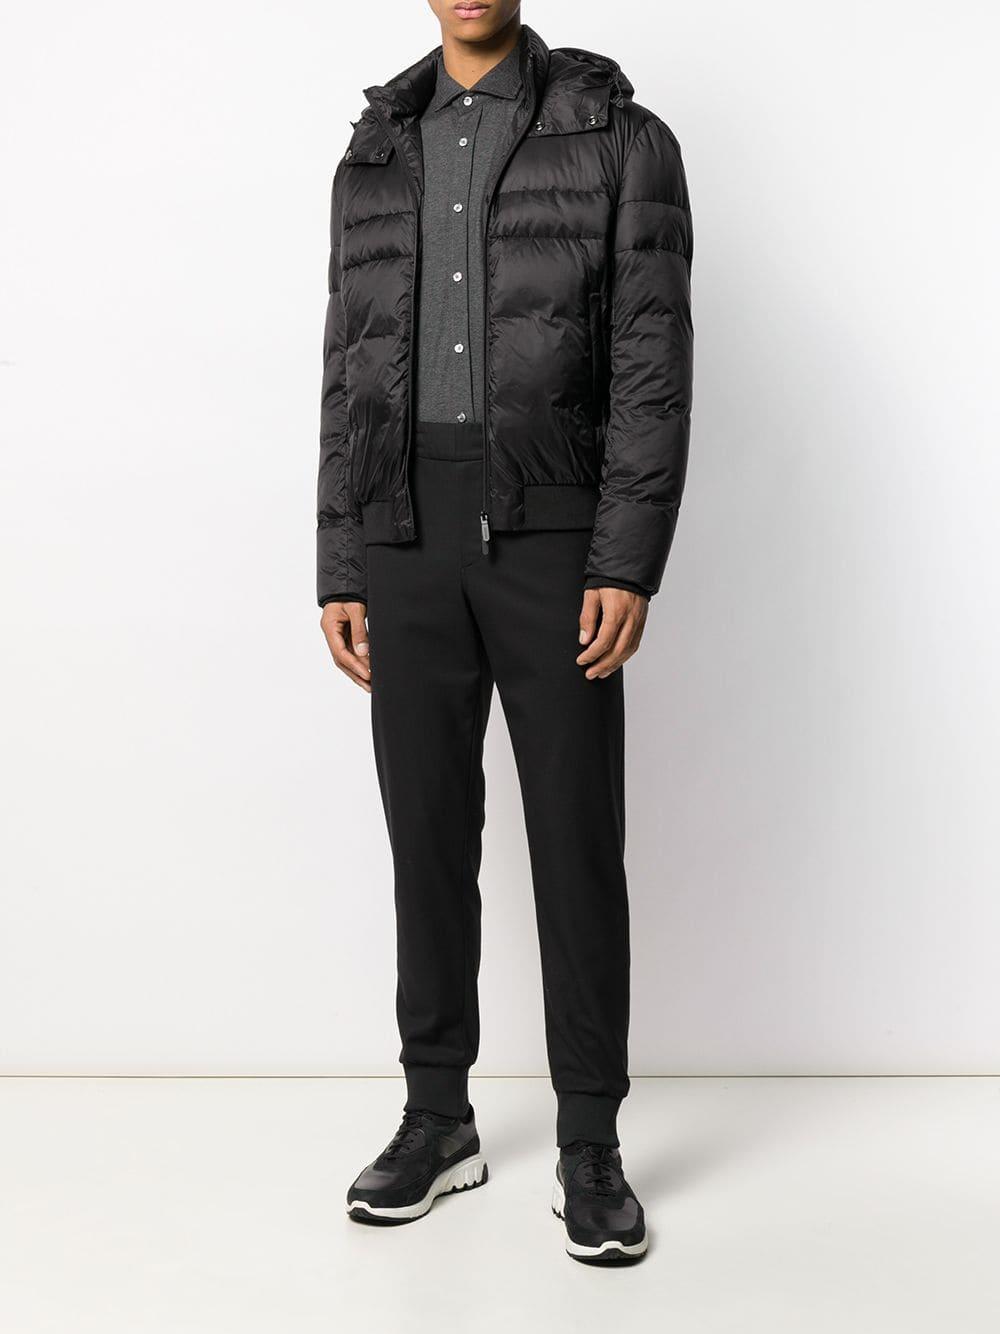 Emporio Armani Synthetic Hooded Padded Jacket in Black for Men - Lyst